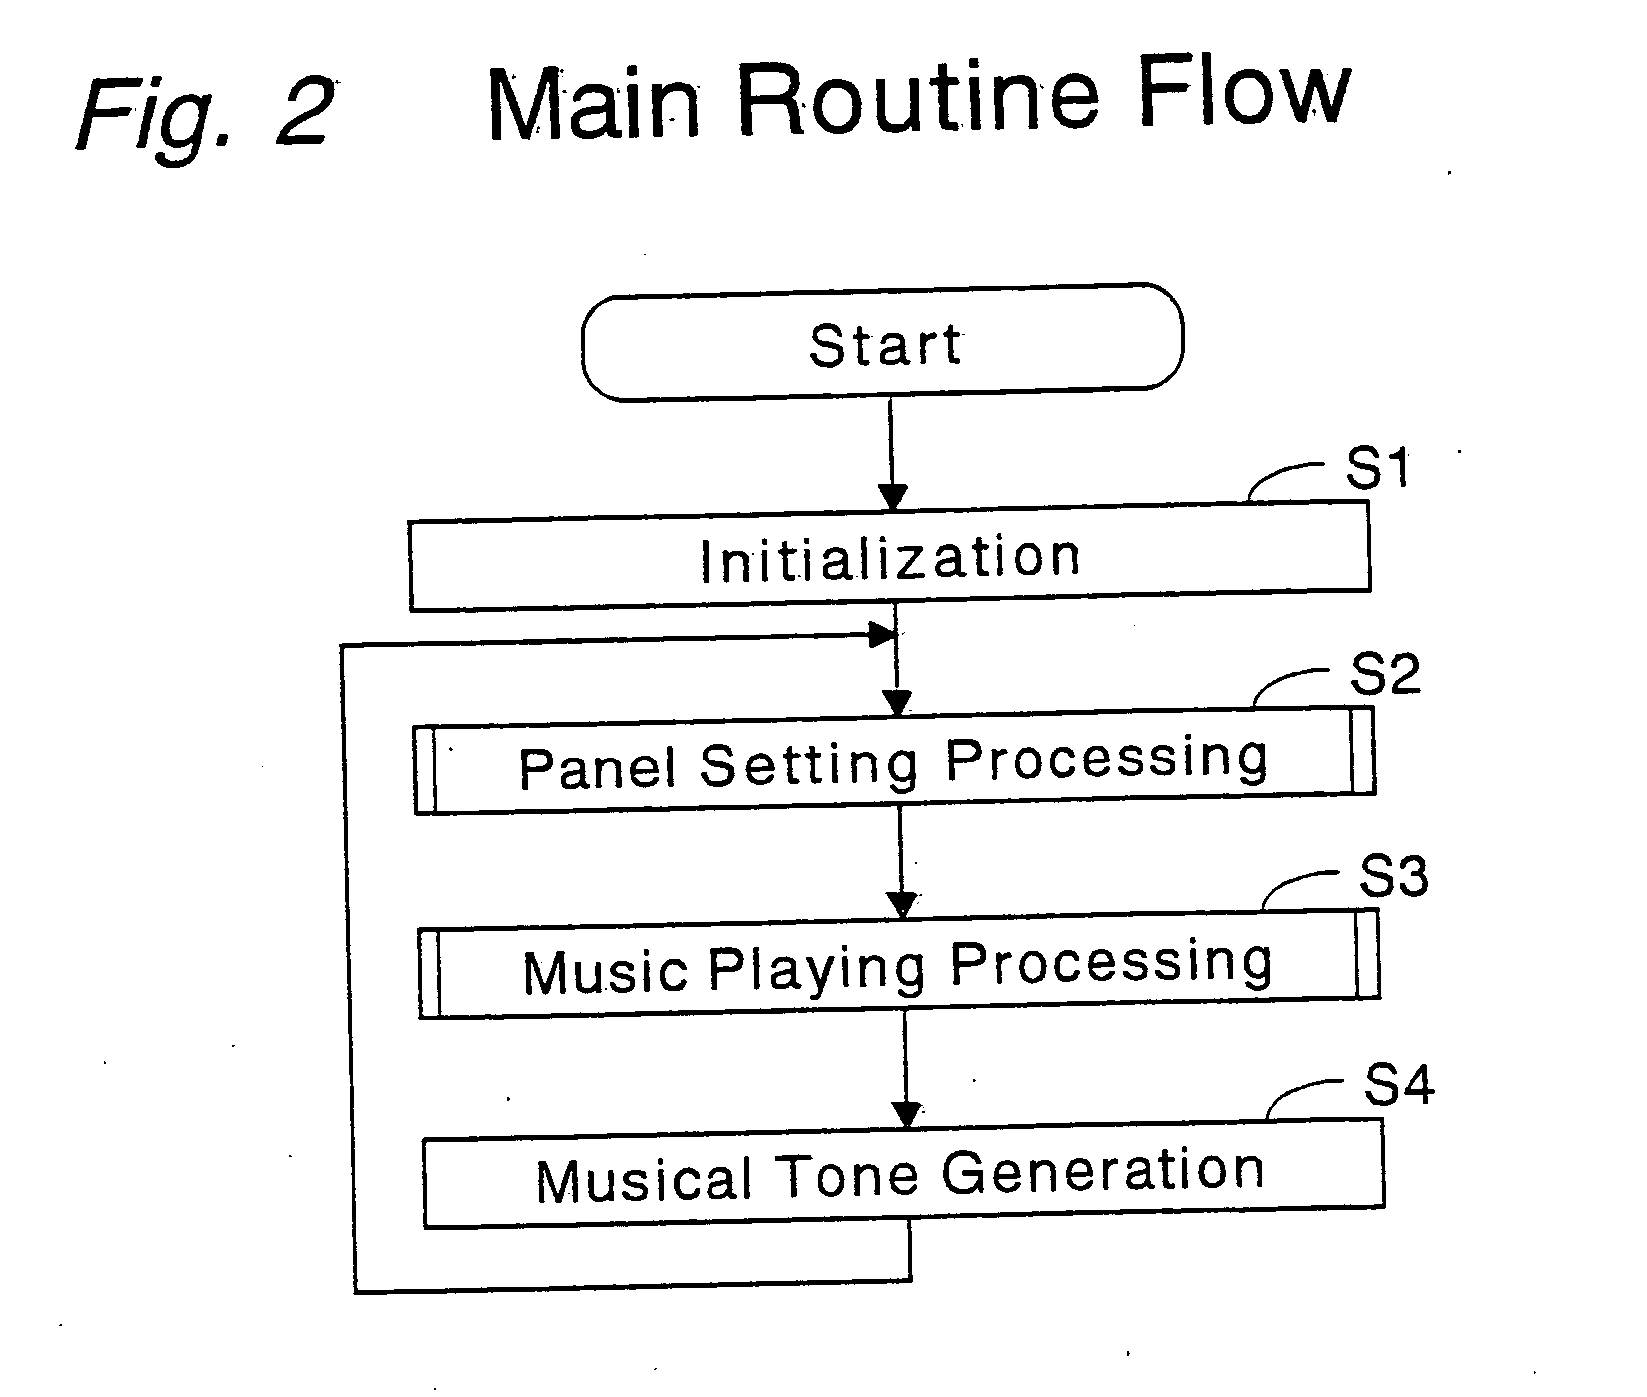 Automatic music playing apparatus and computer program therefor